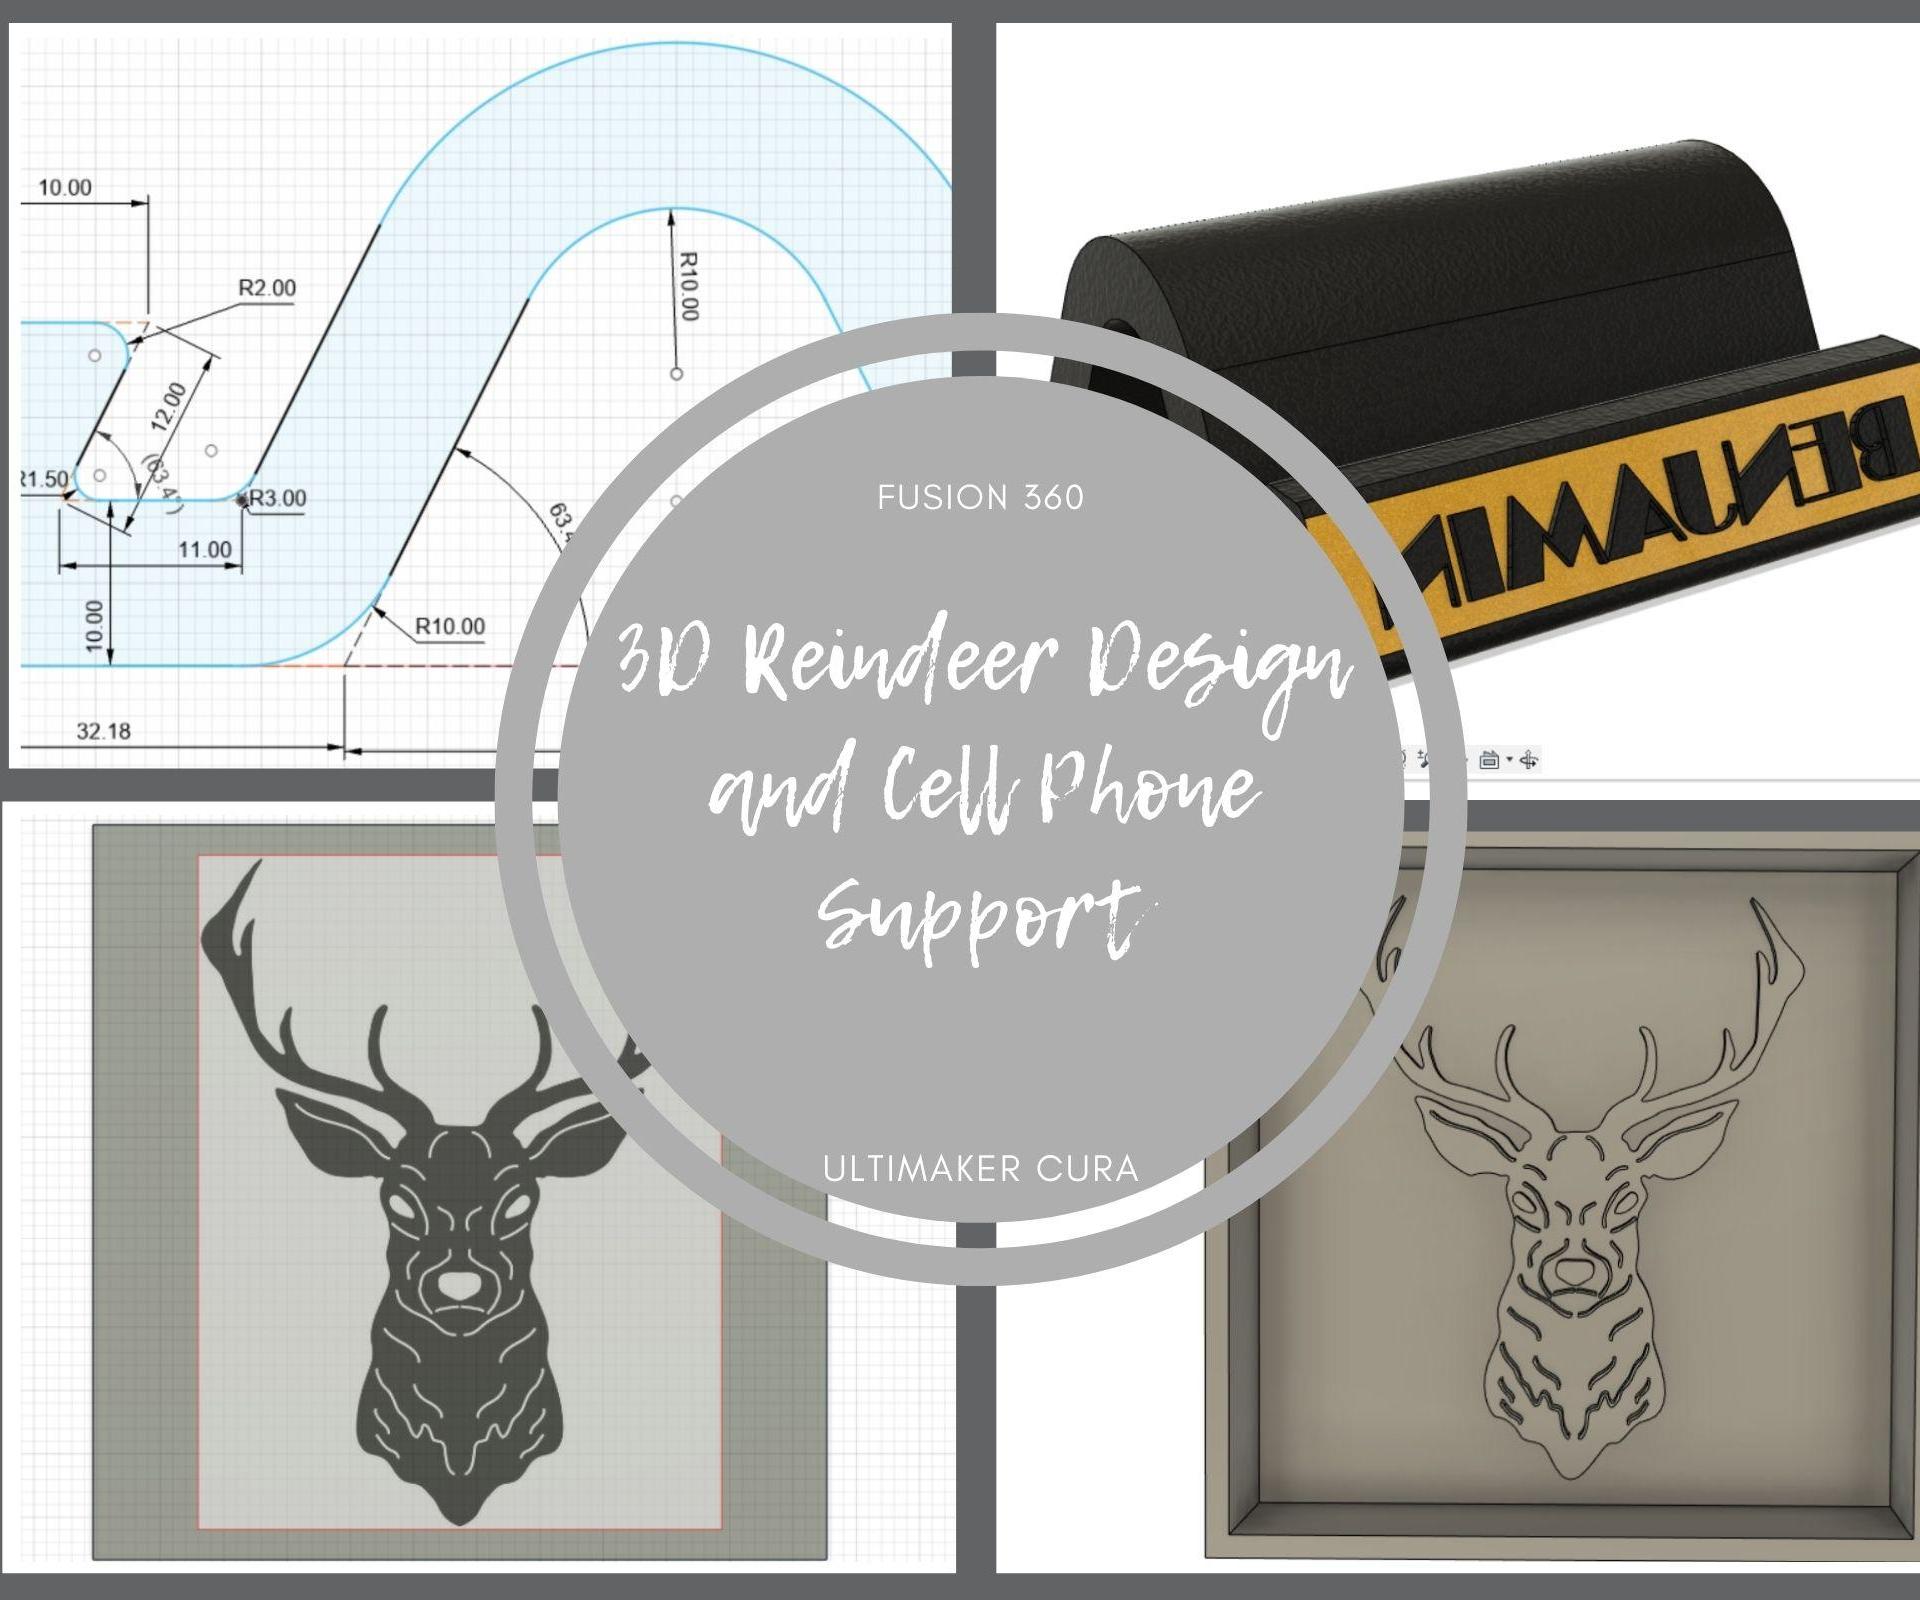 Cell Phone Support and 3D Reindeer Design _PC04_Benjamin Gamboa Durand